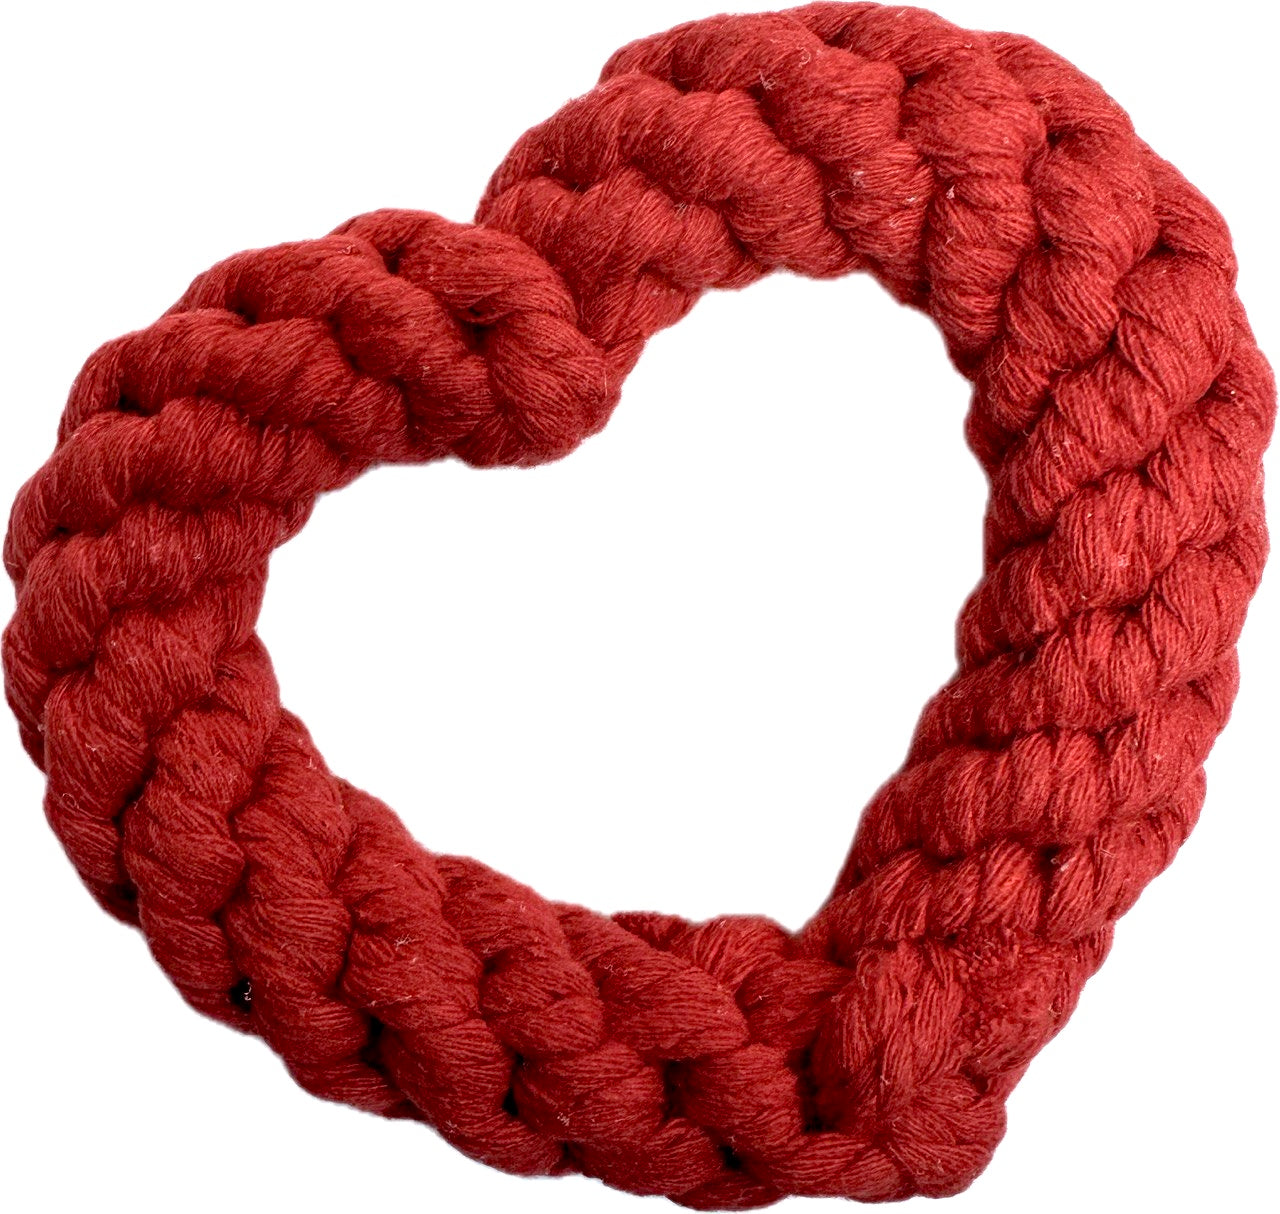 Heart Shaped Rope Toy